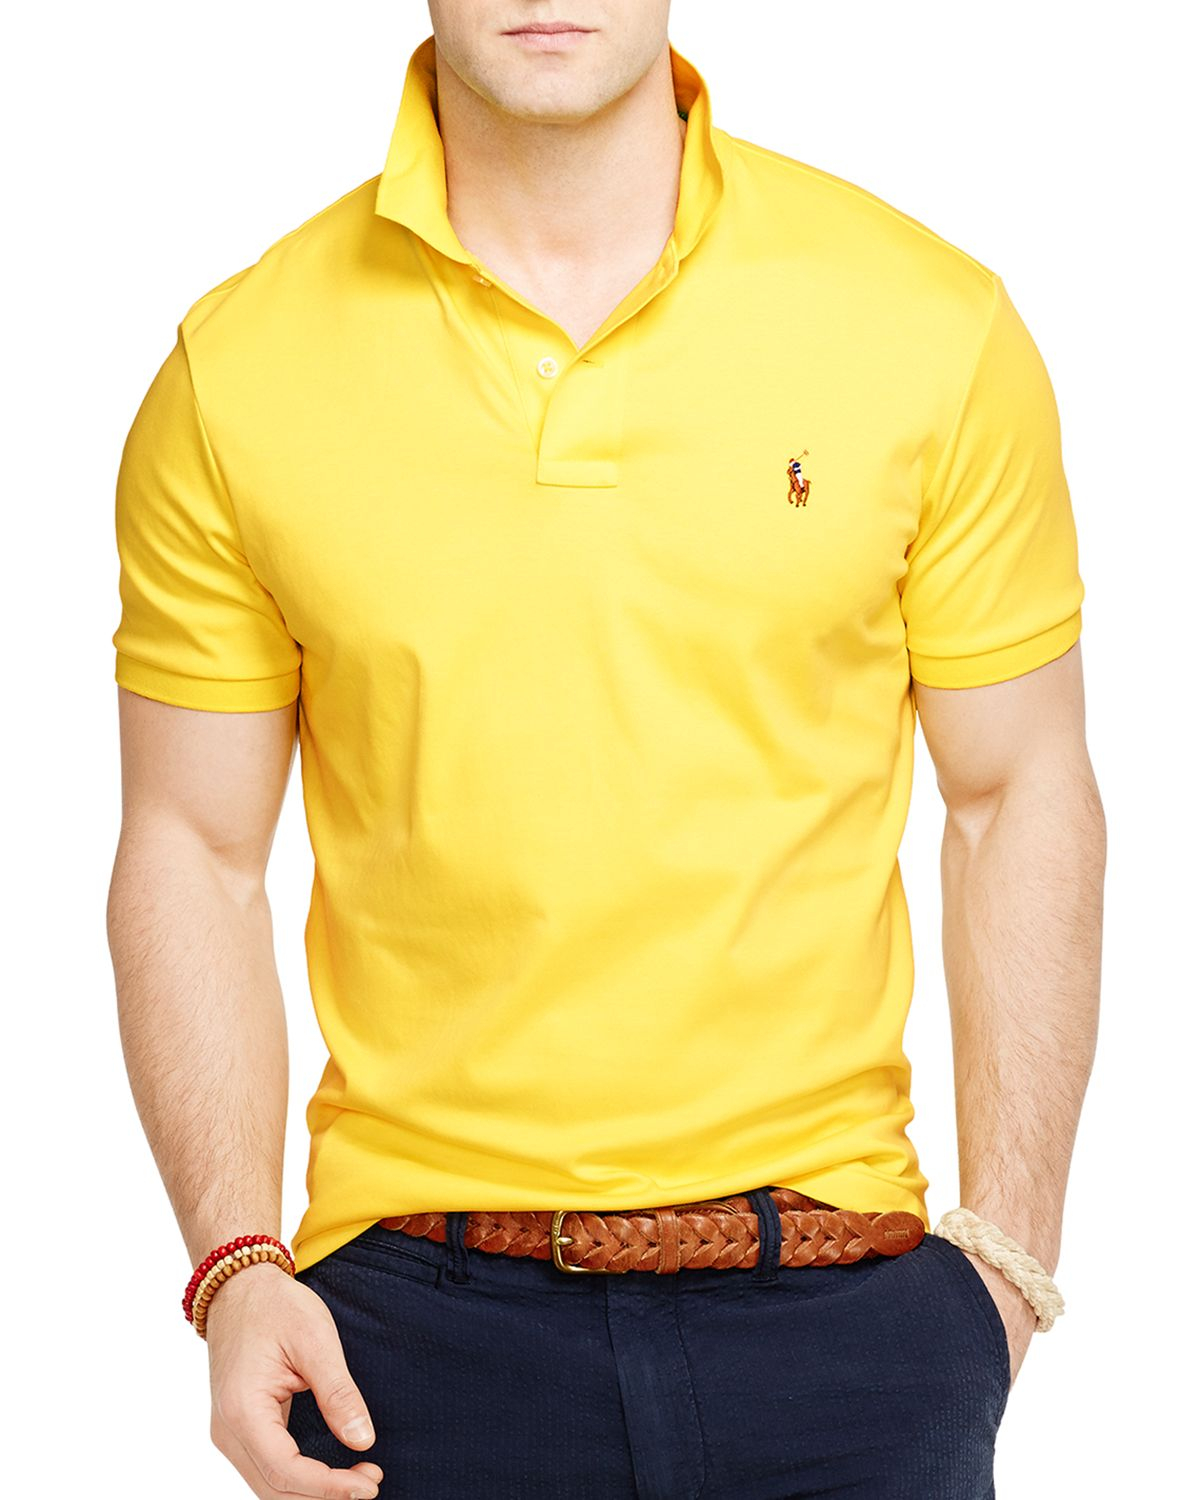 polo ralph lauren soft touch polo,Save up to 17%,www.syncro-system.bg